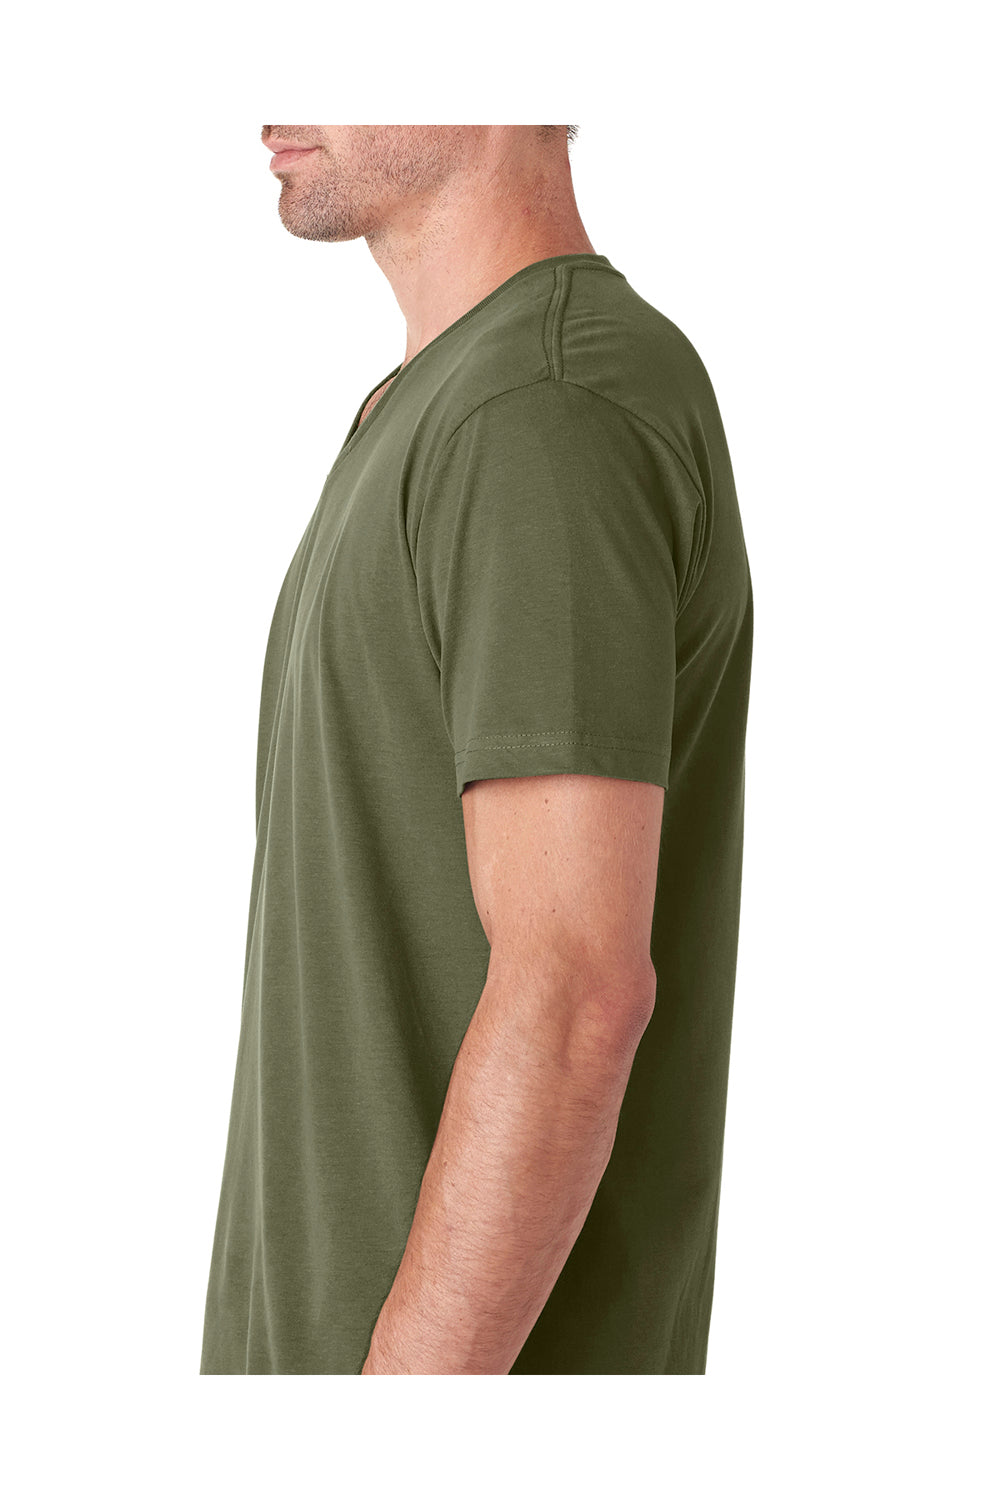 Next Level 6440 Mens Sueded Jersey Short Sleeve V-Neck T-Shirt Military Green Side